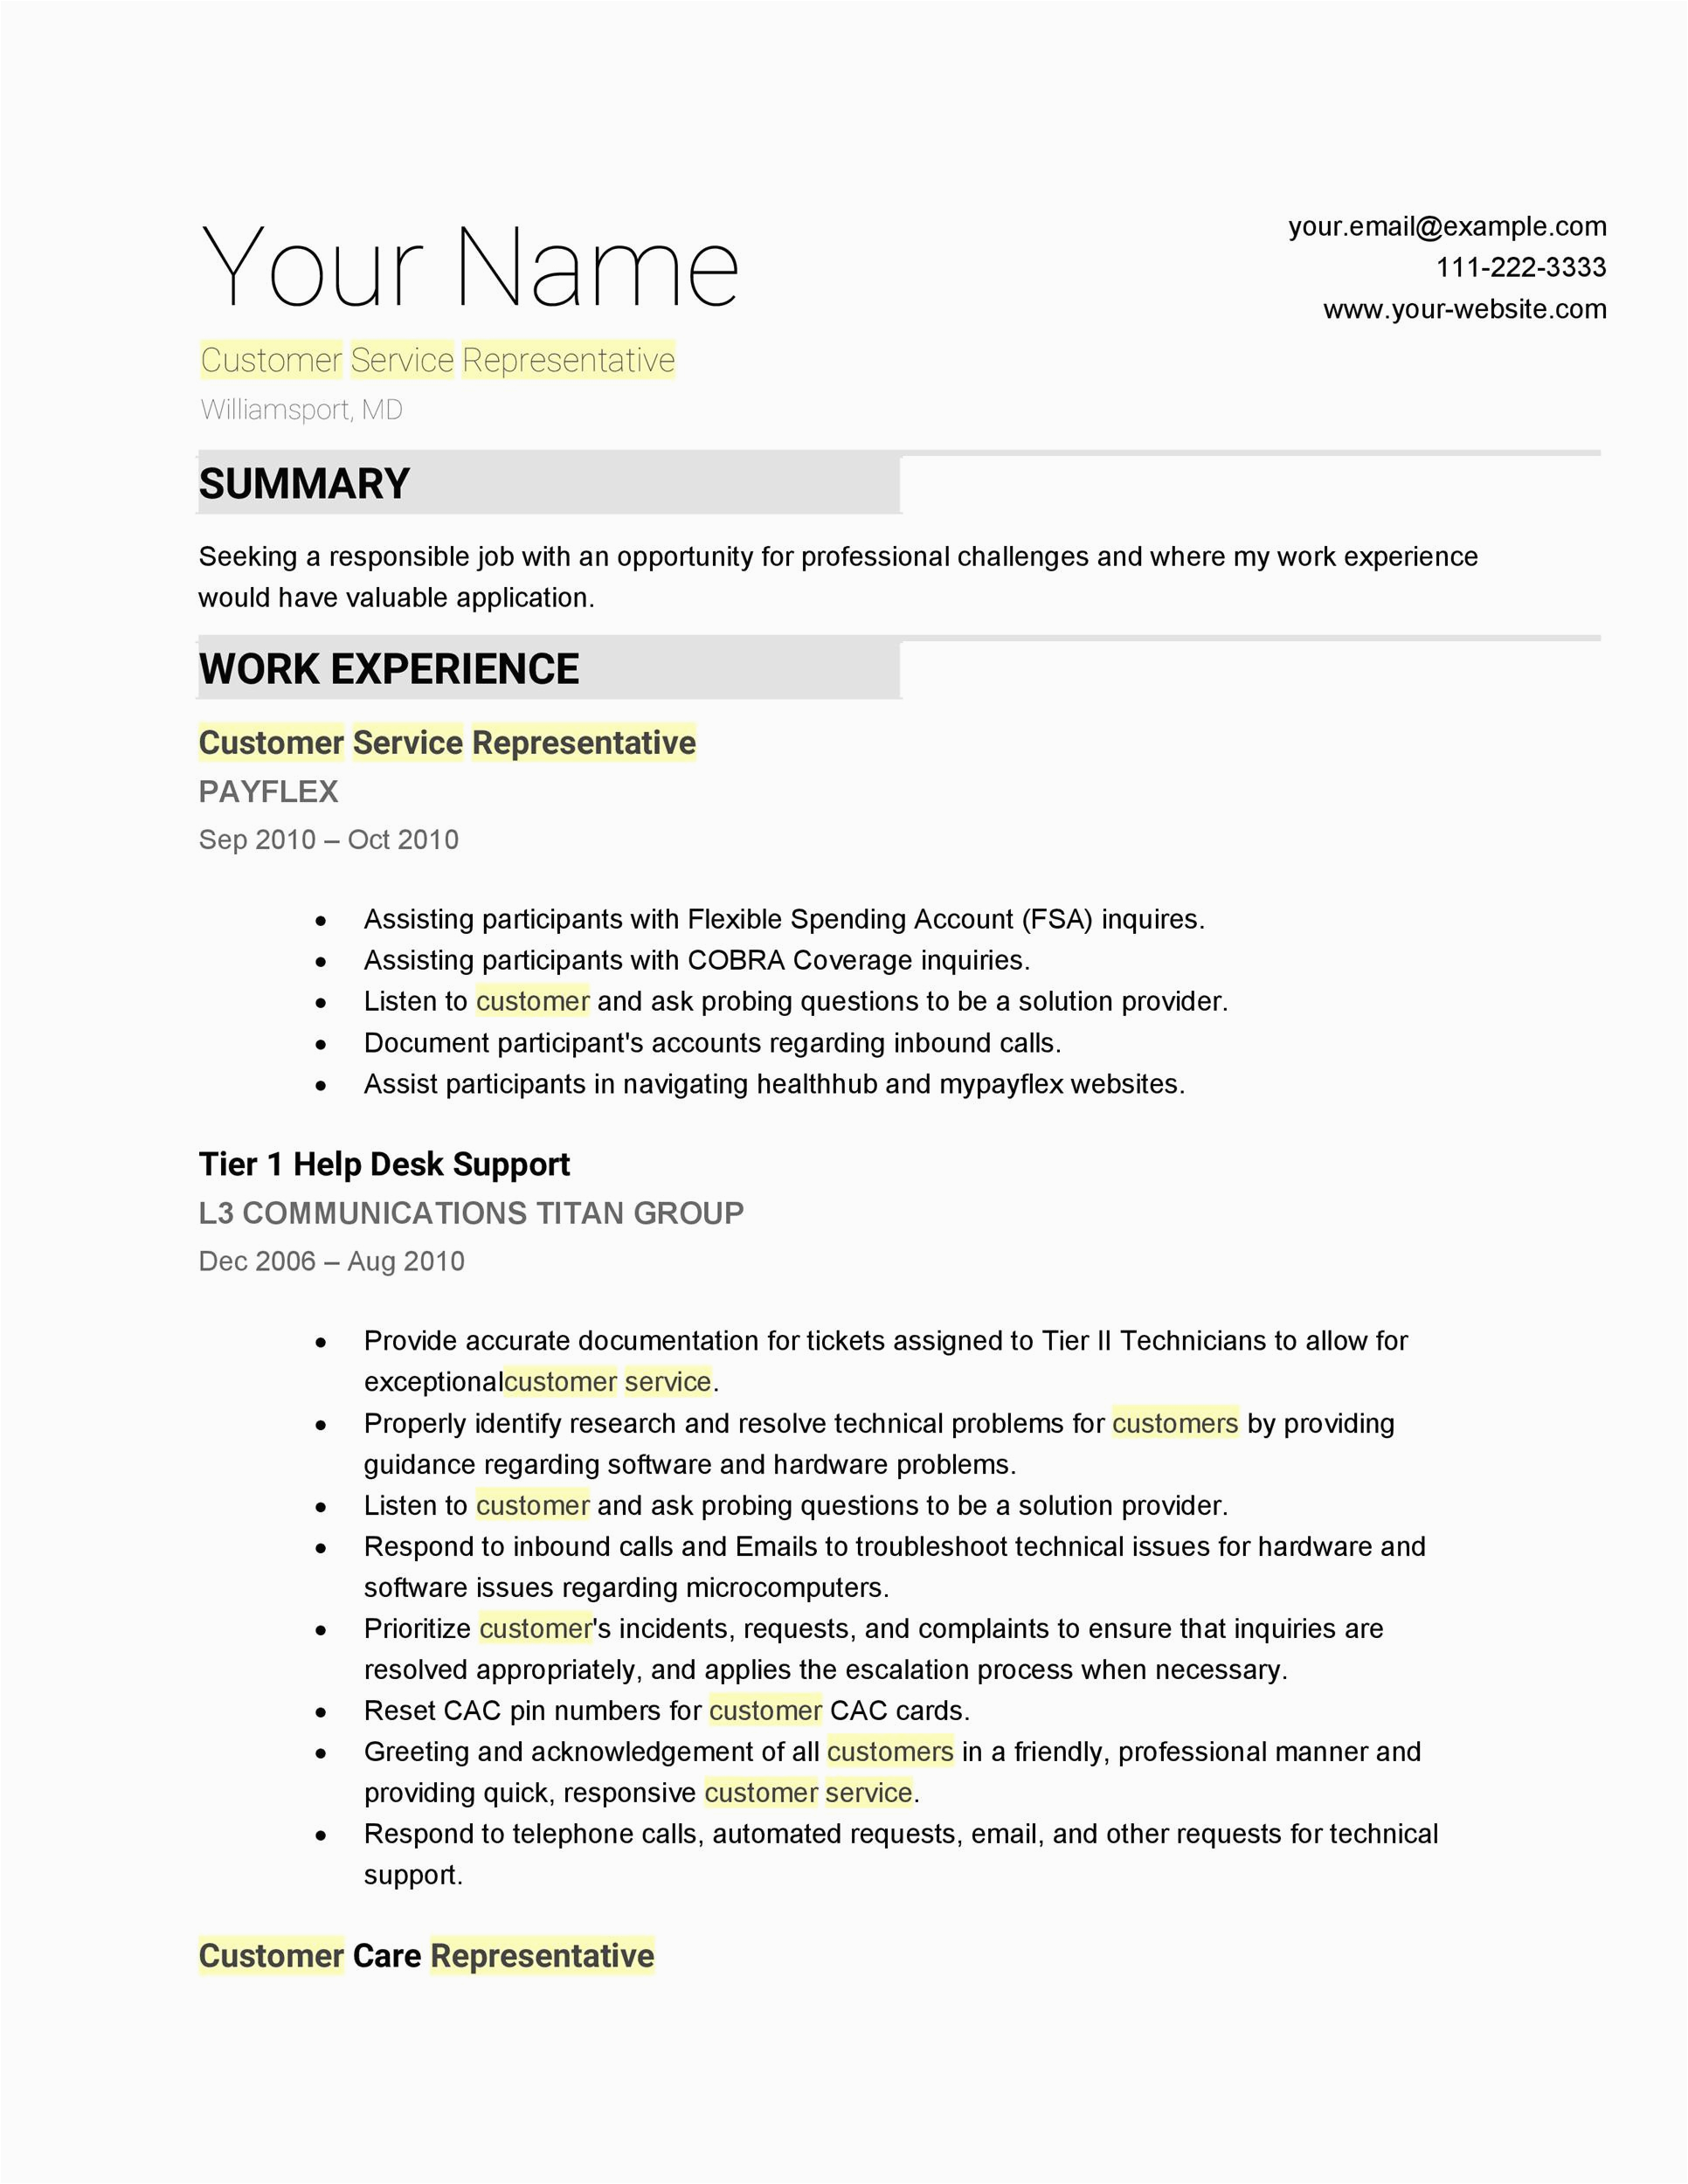 Free Resume Templates for Customer Service Representative 30 Customer Service Resume Examples Templatelab